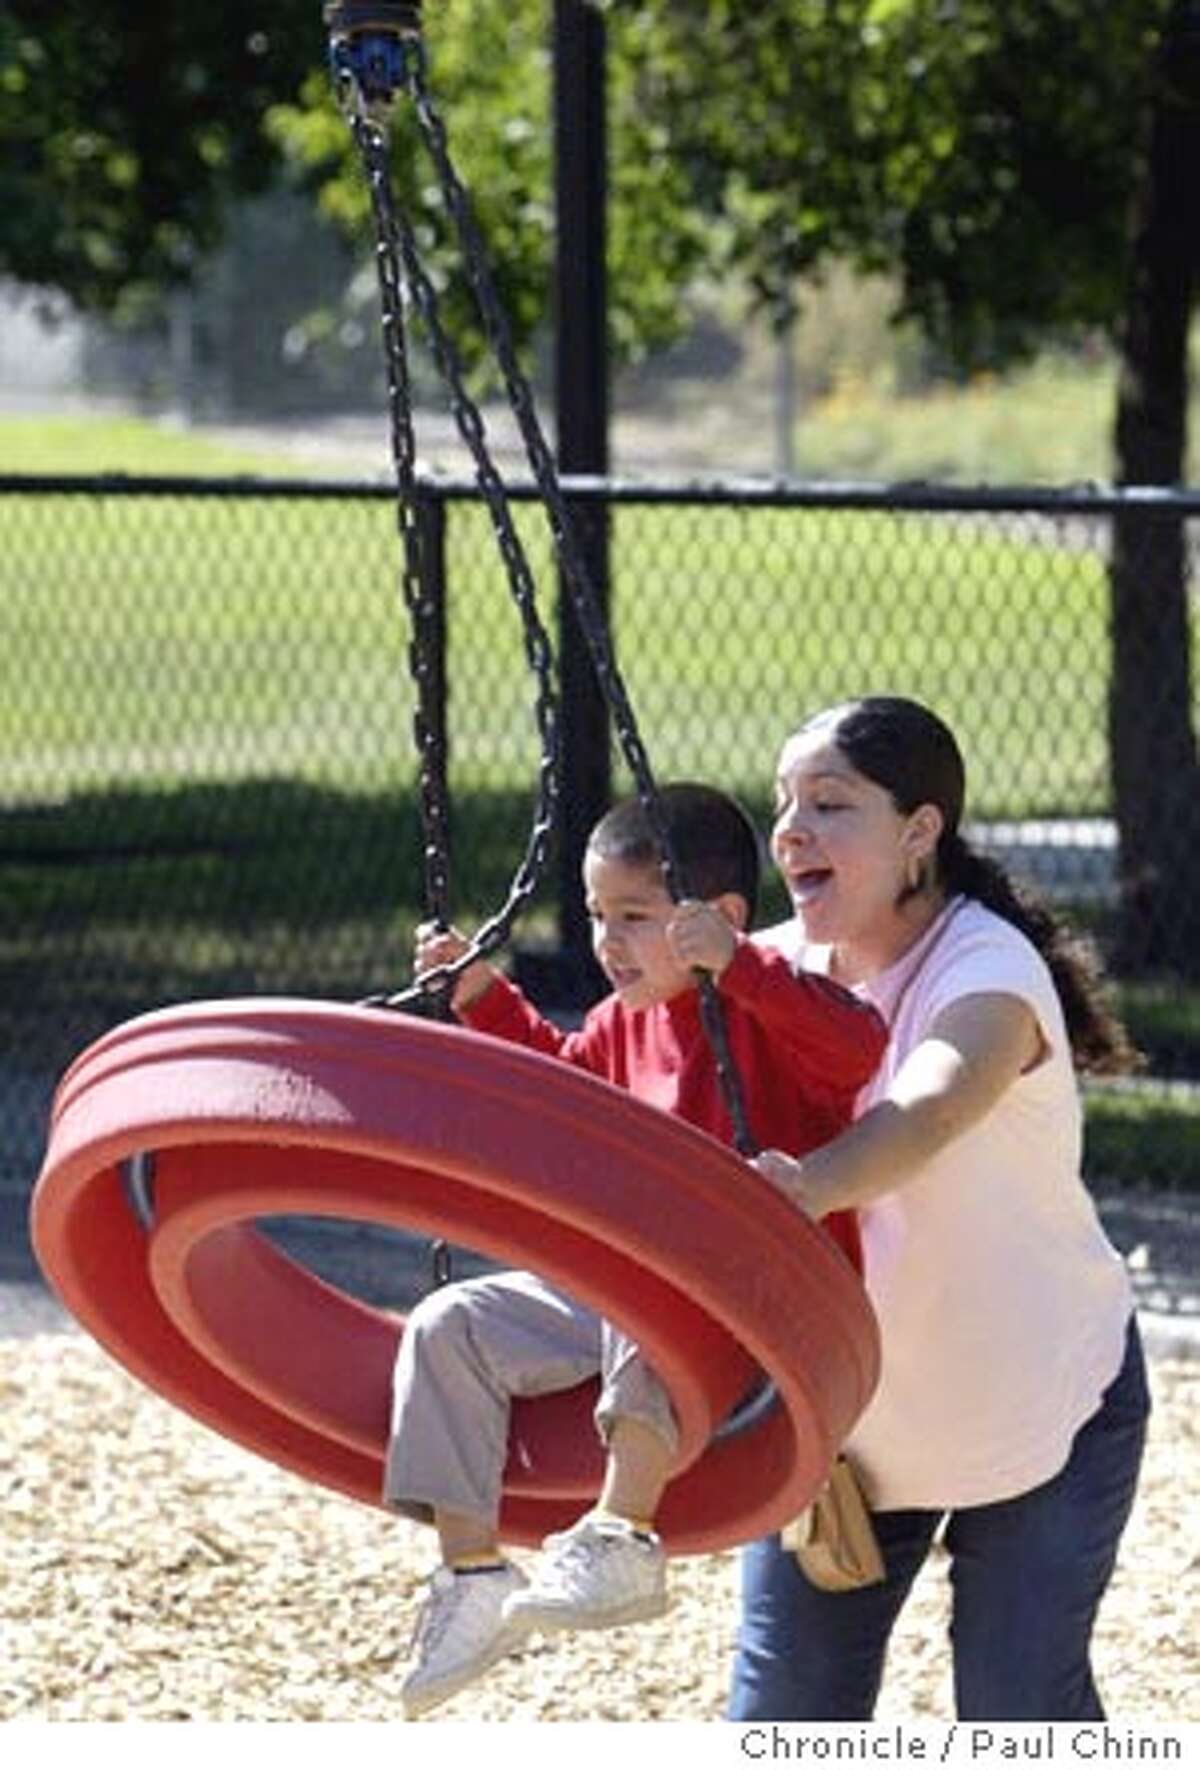 Anna Gomez pushes her son, Adrian, on a swing at the aging playground in Hillcrest Park. Chronicle photo by Paul Chinn